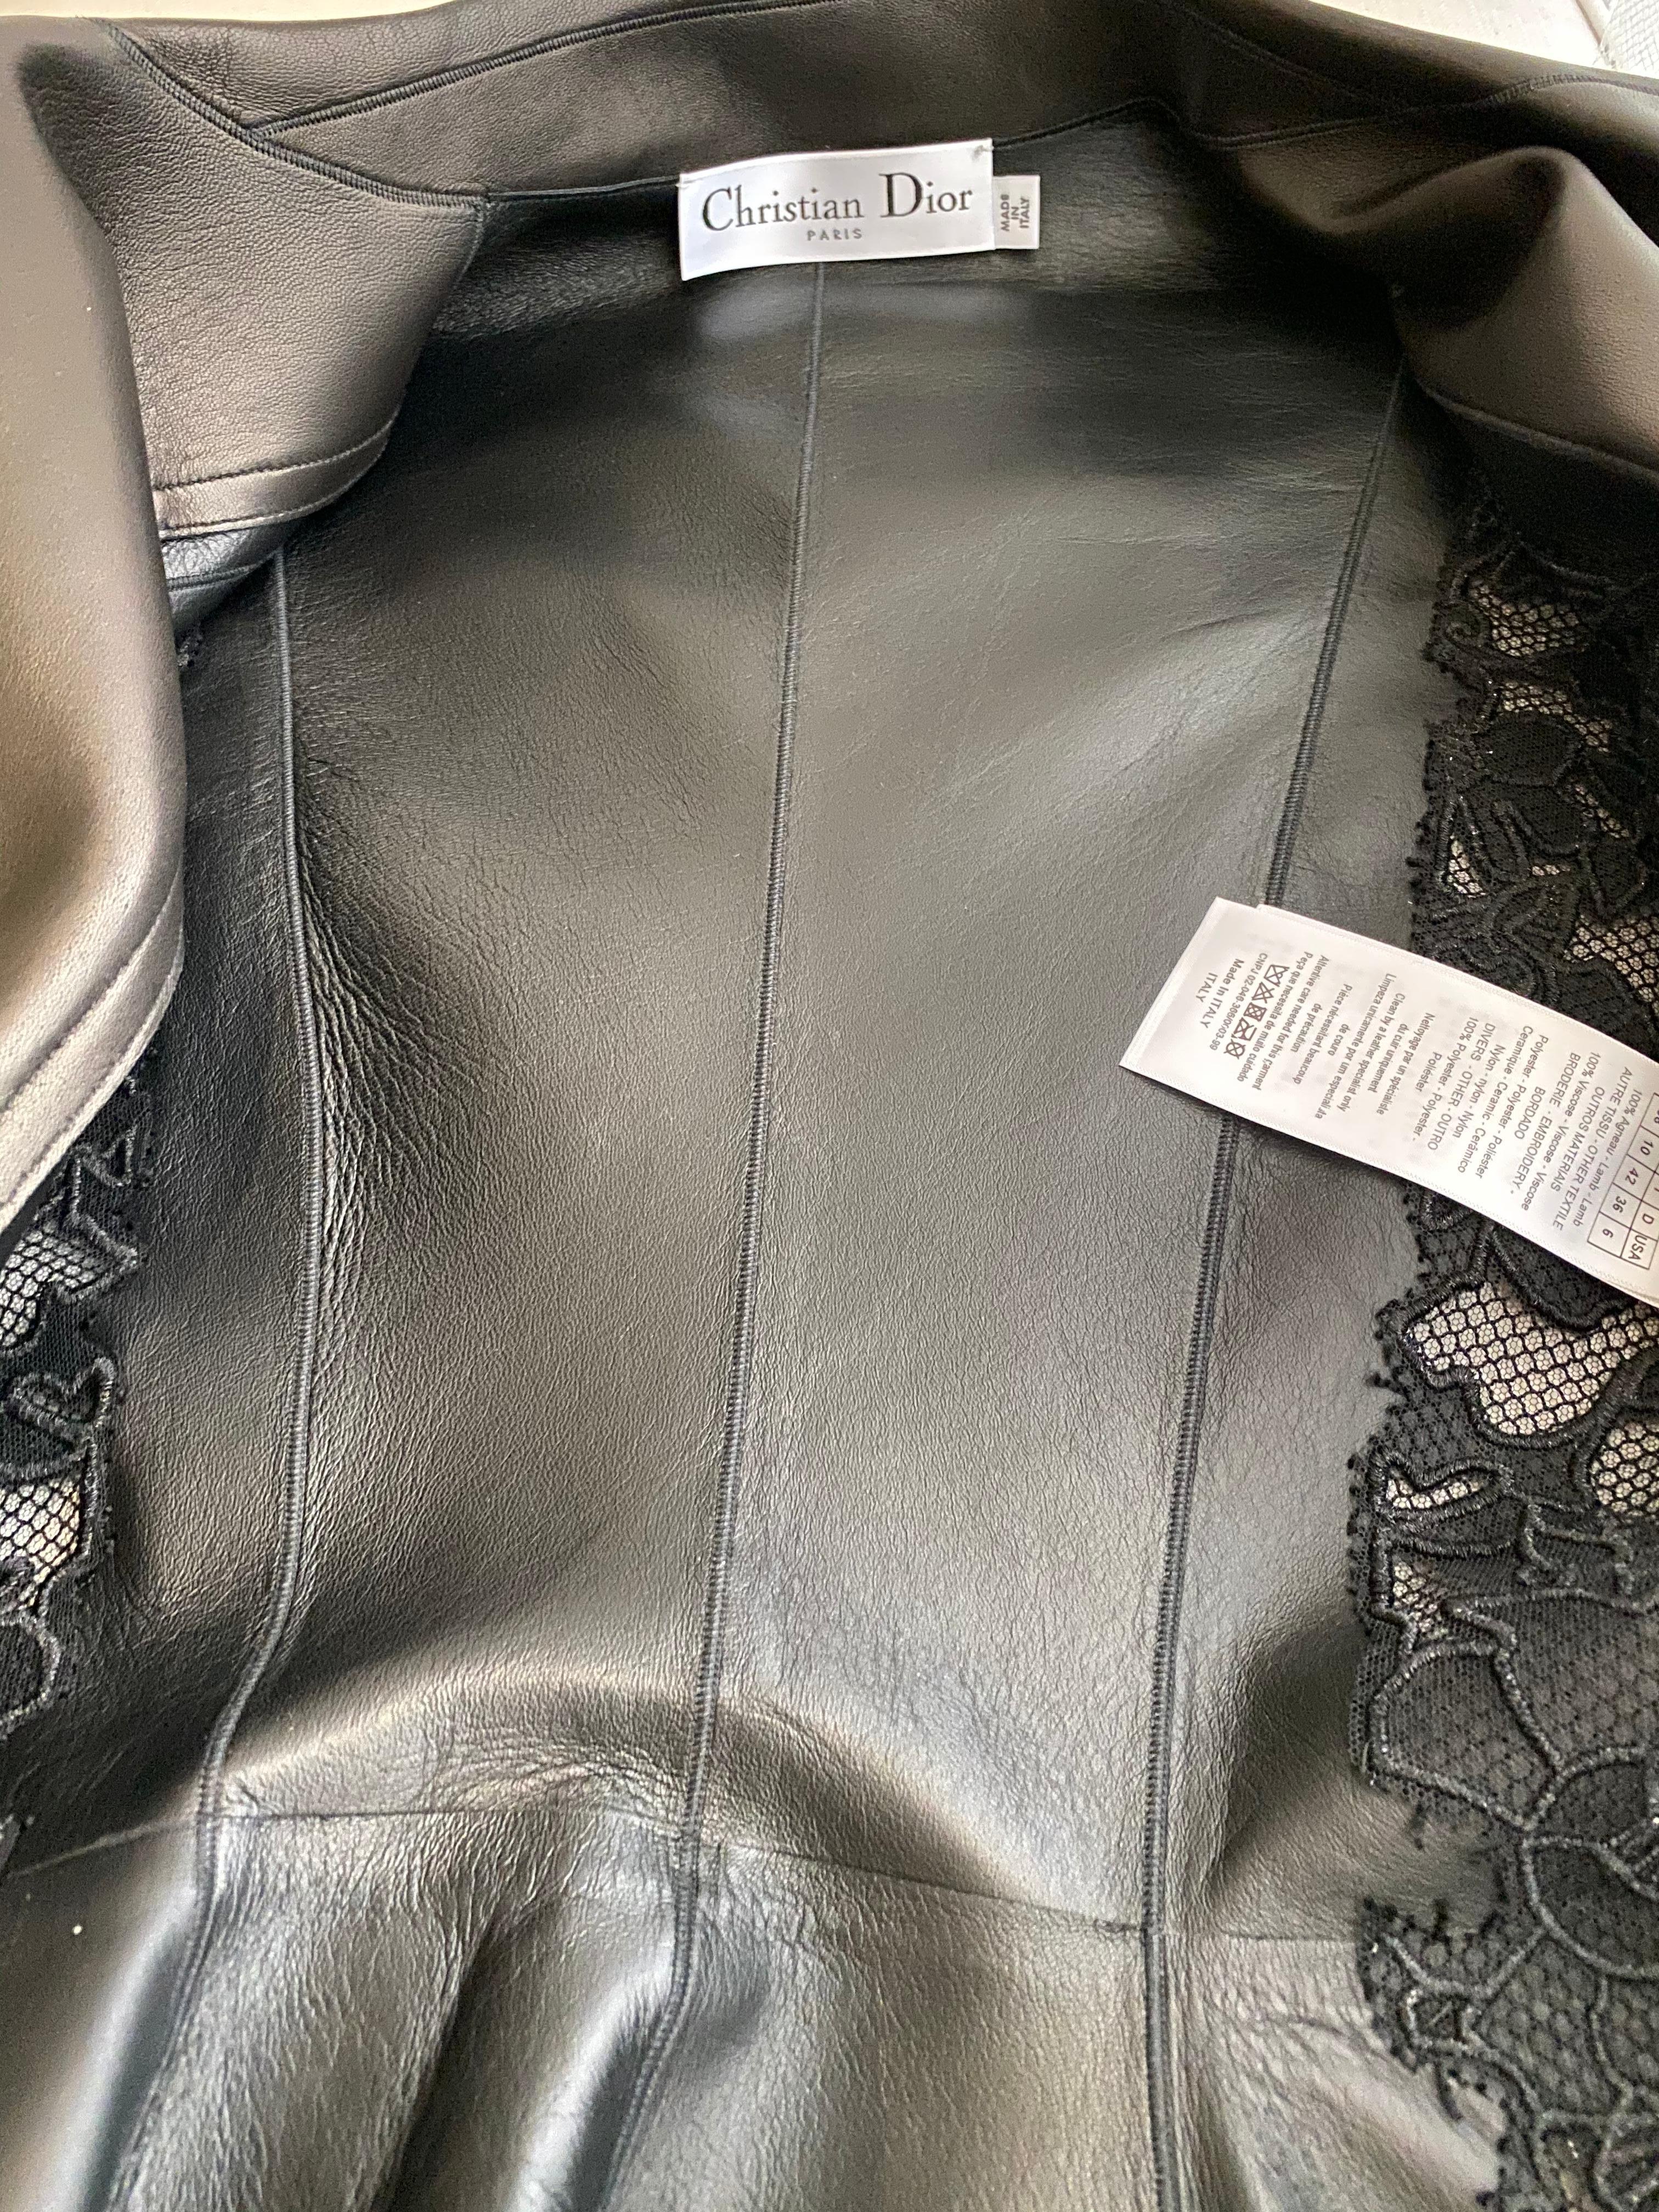 Christian Dior Black Leather Peplum Jacket with Lace  In Excellent Condition For Sale In Beverly Hills, CA